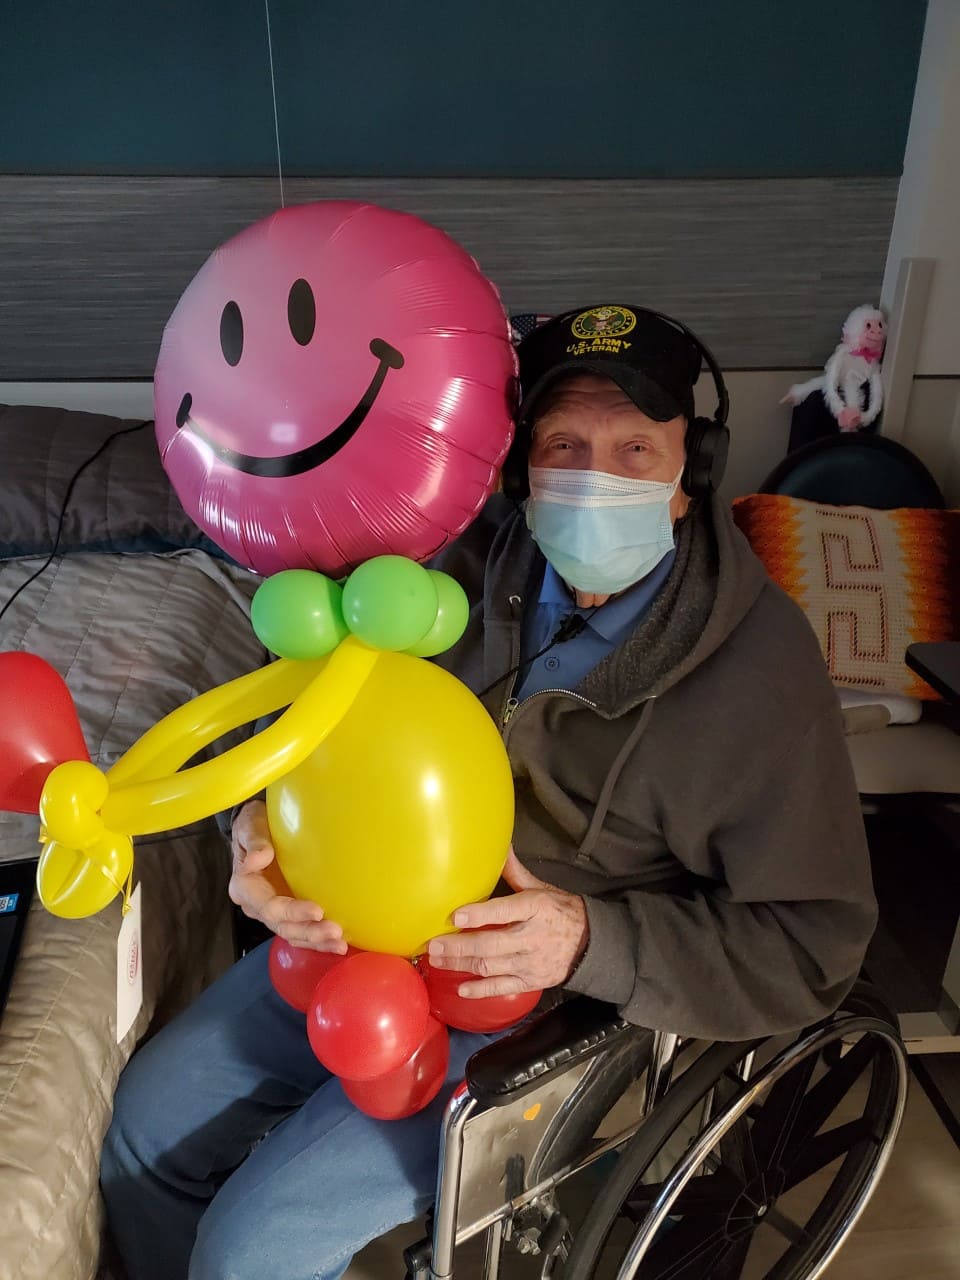 Fun with Balloons!